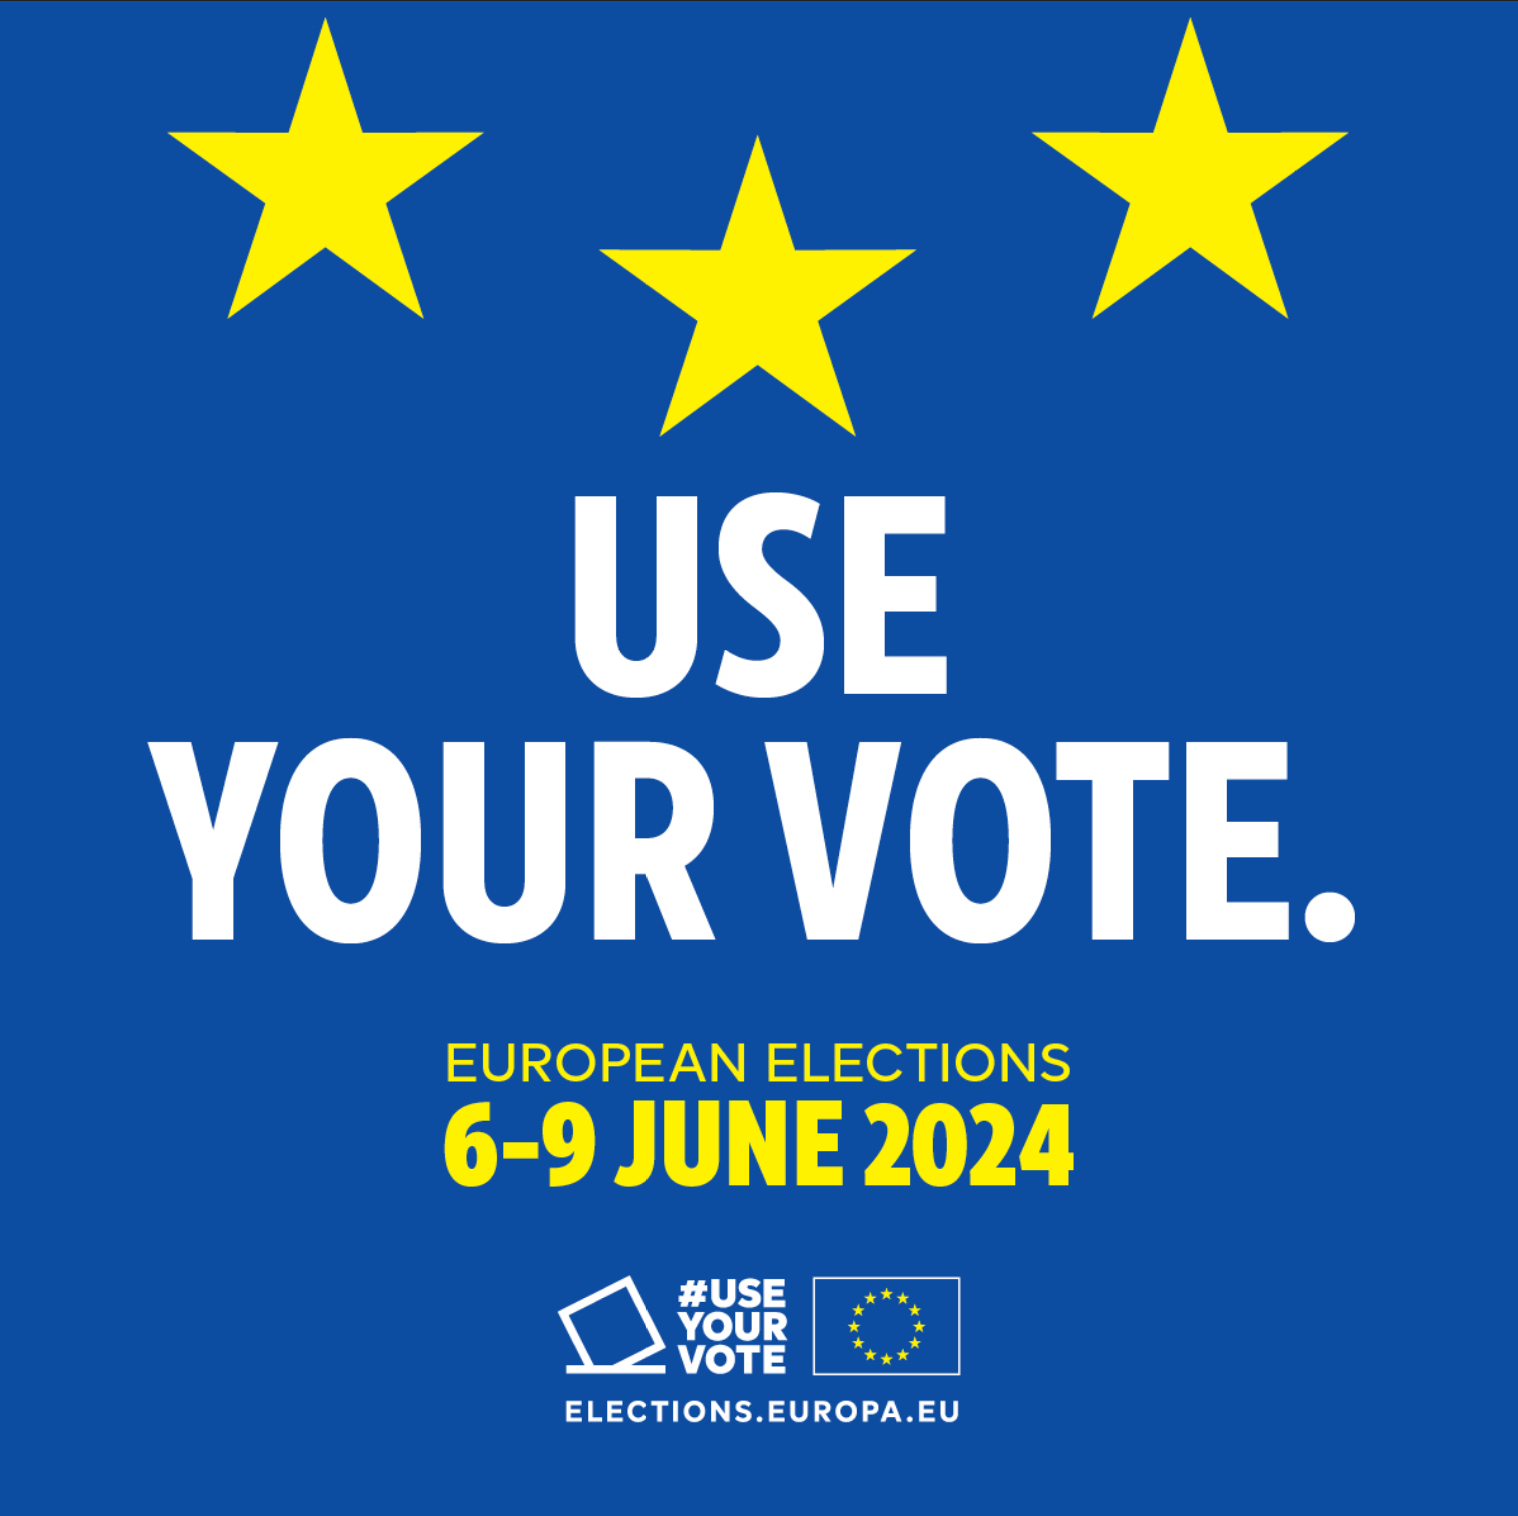 European Elections image - yellow stars on blue background